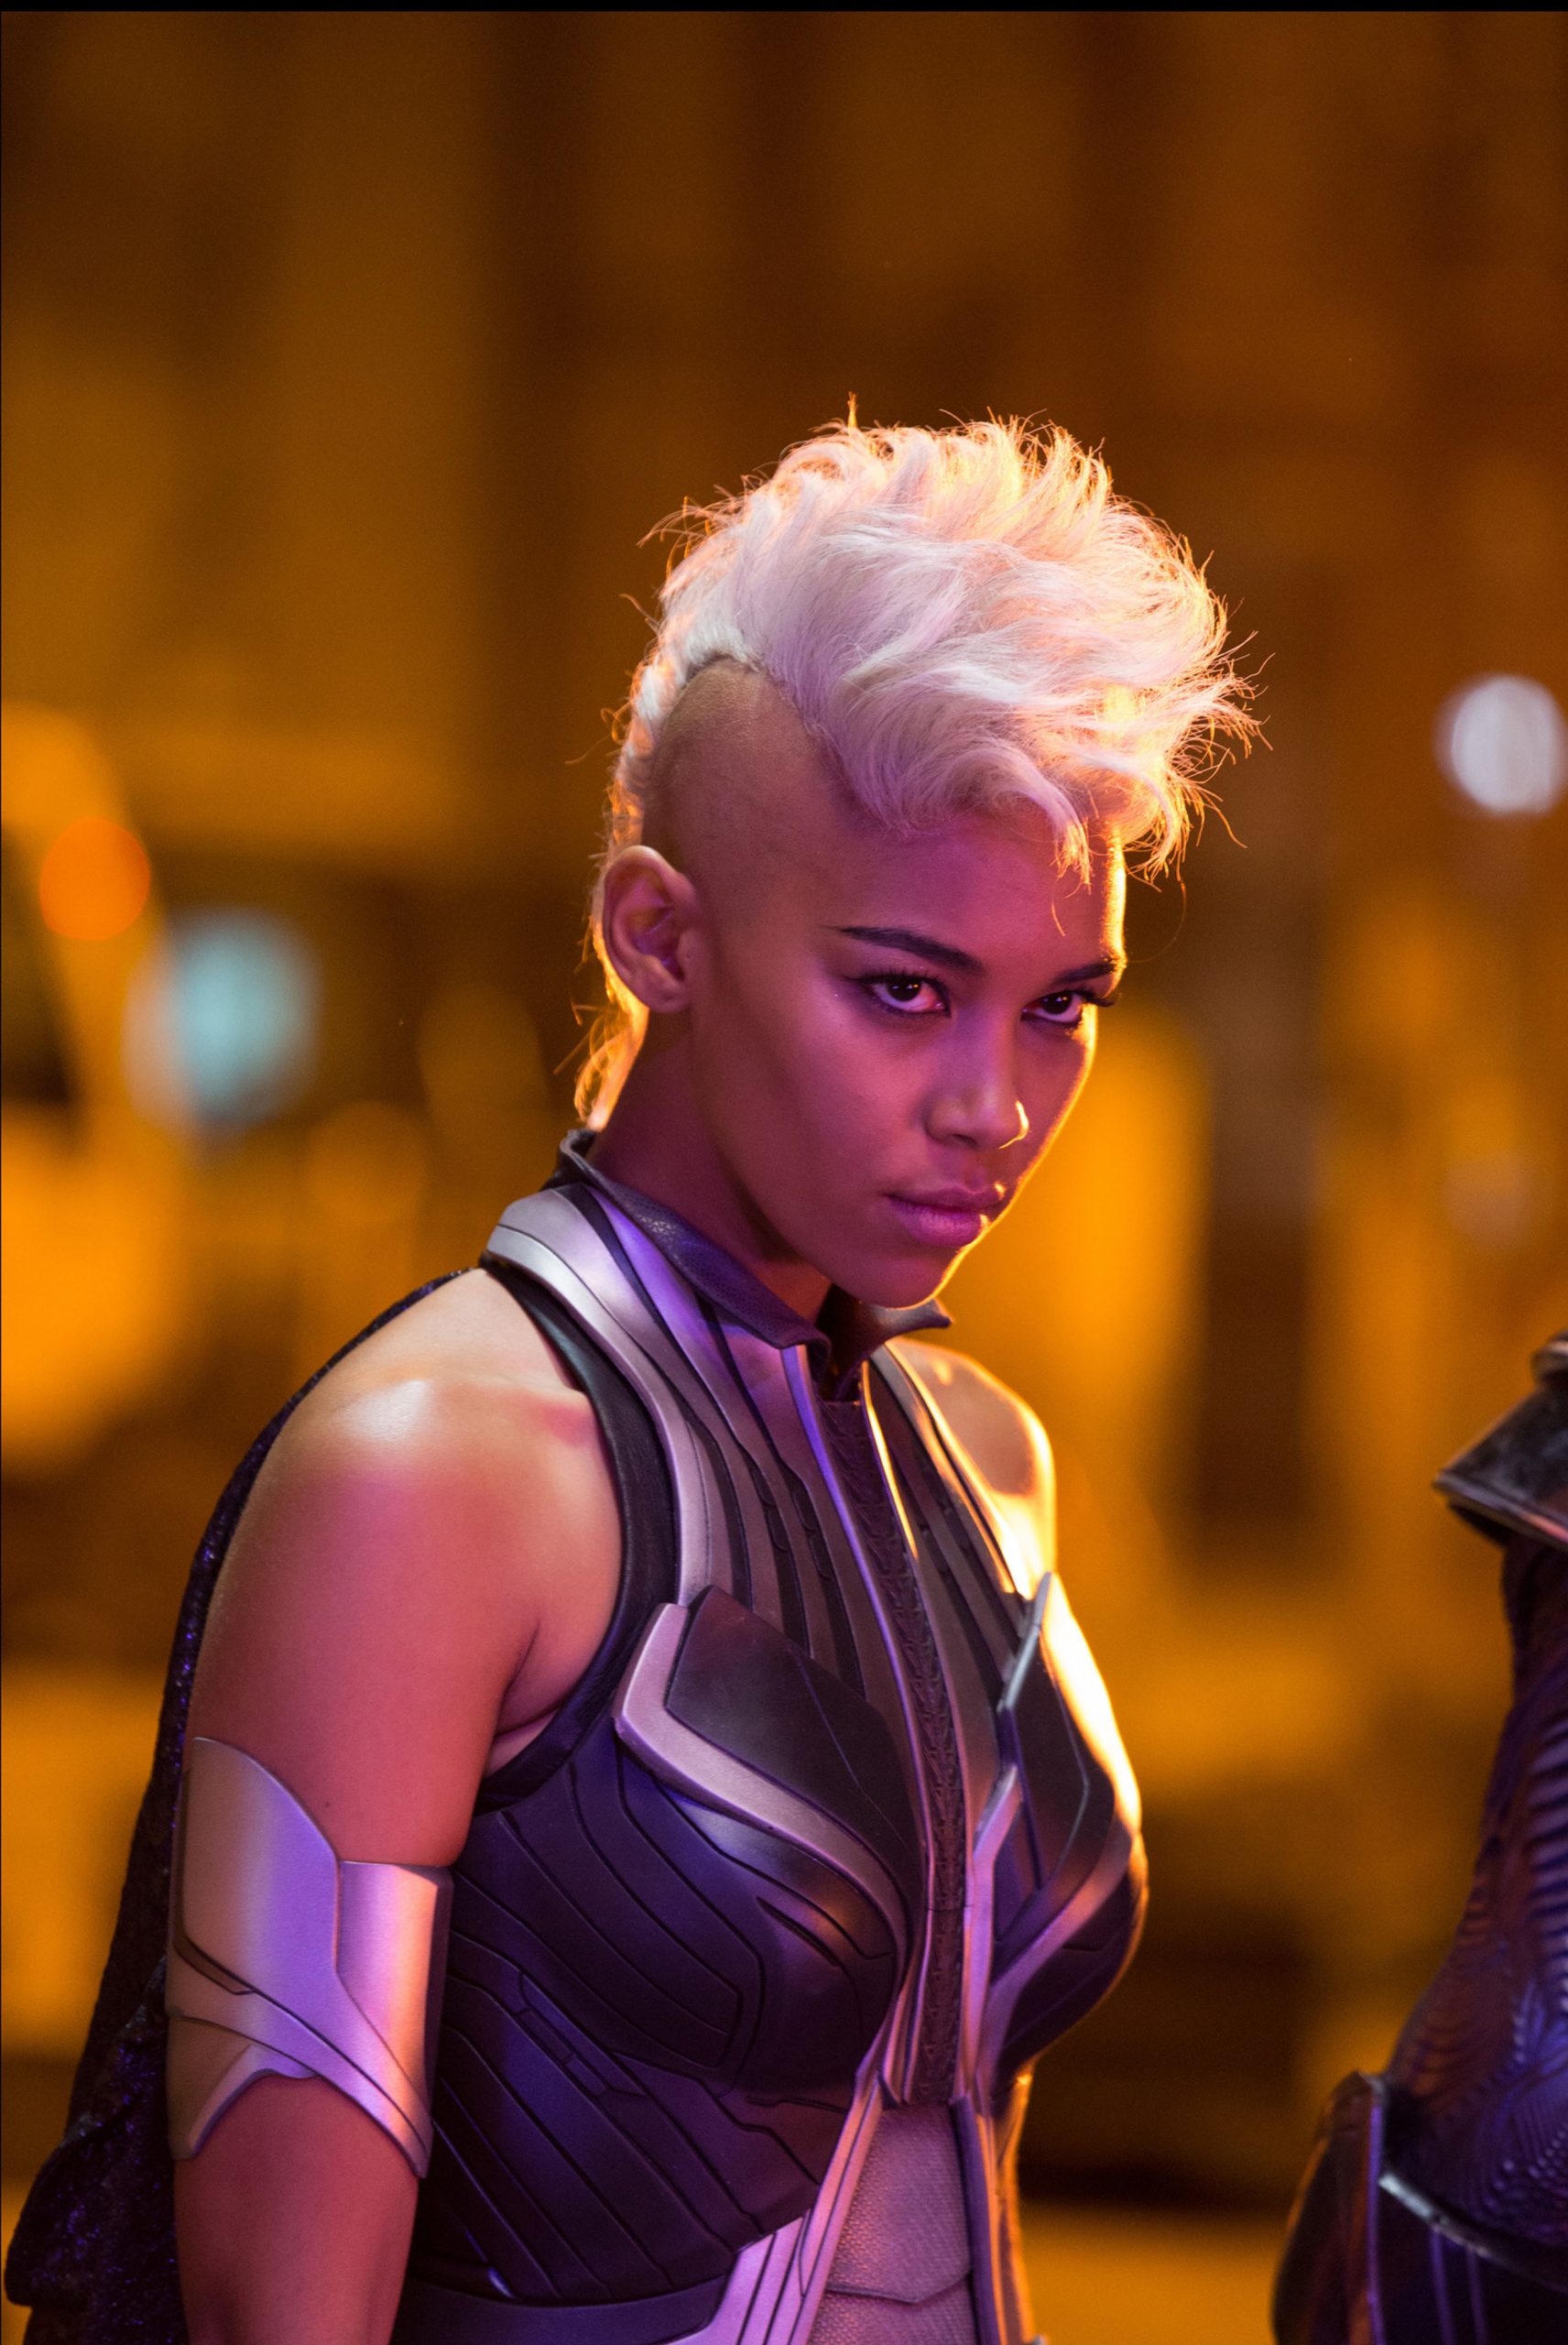 diane abshire recommends pictures of storm from xmen pic